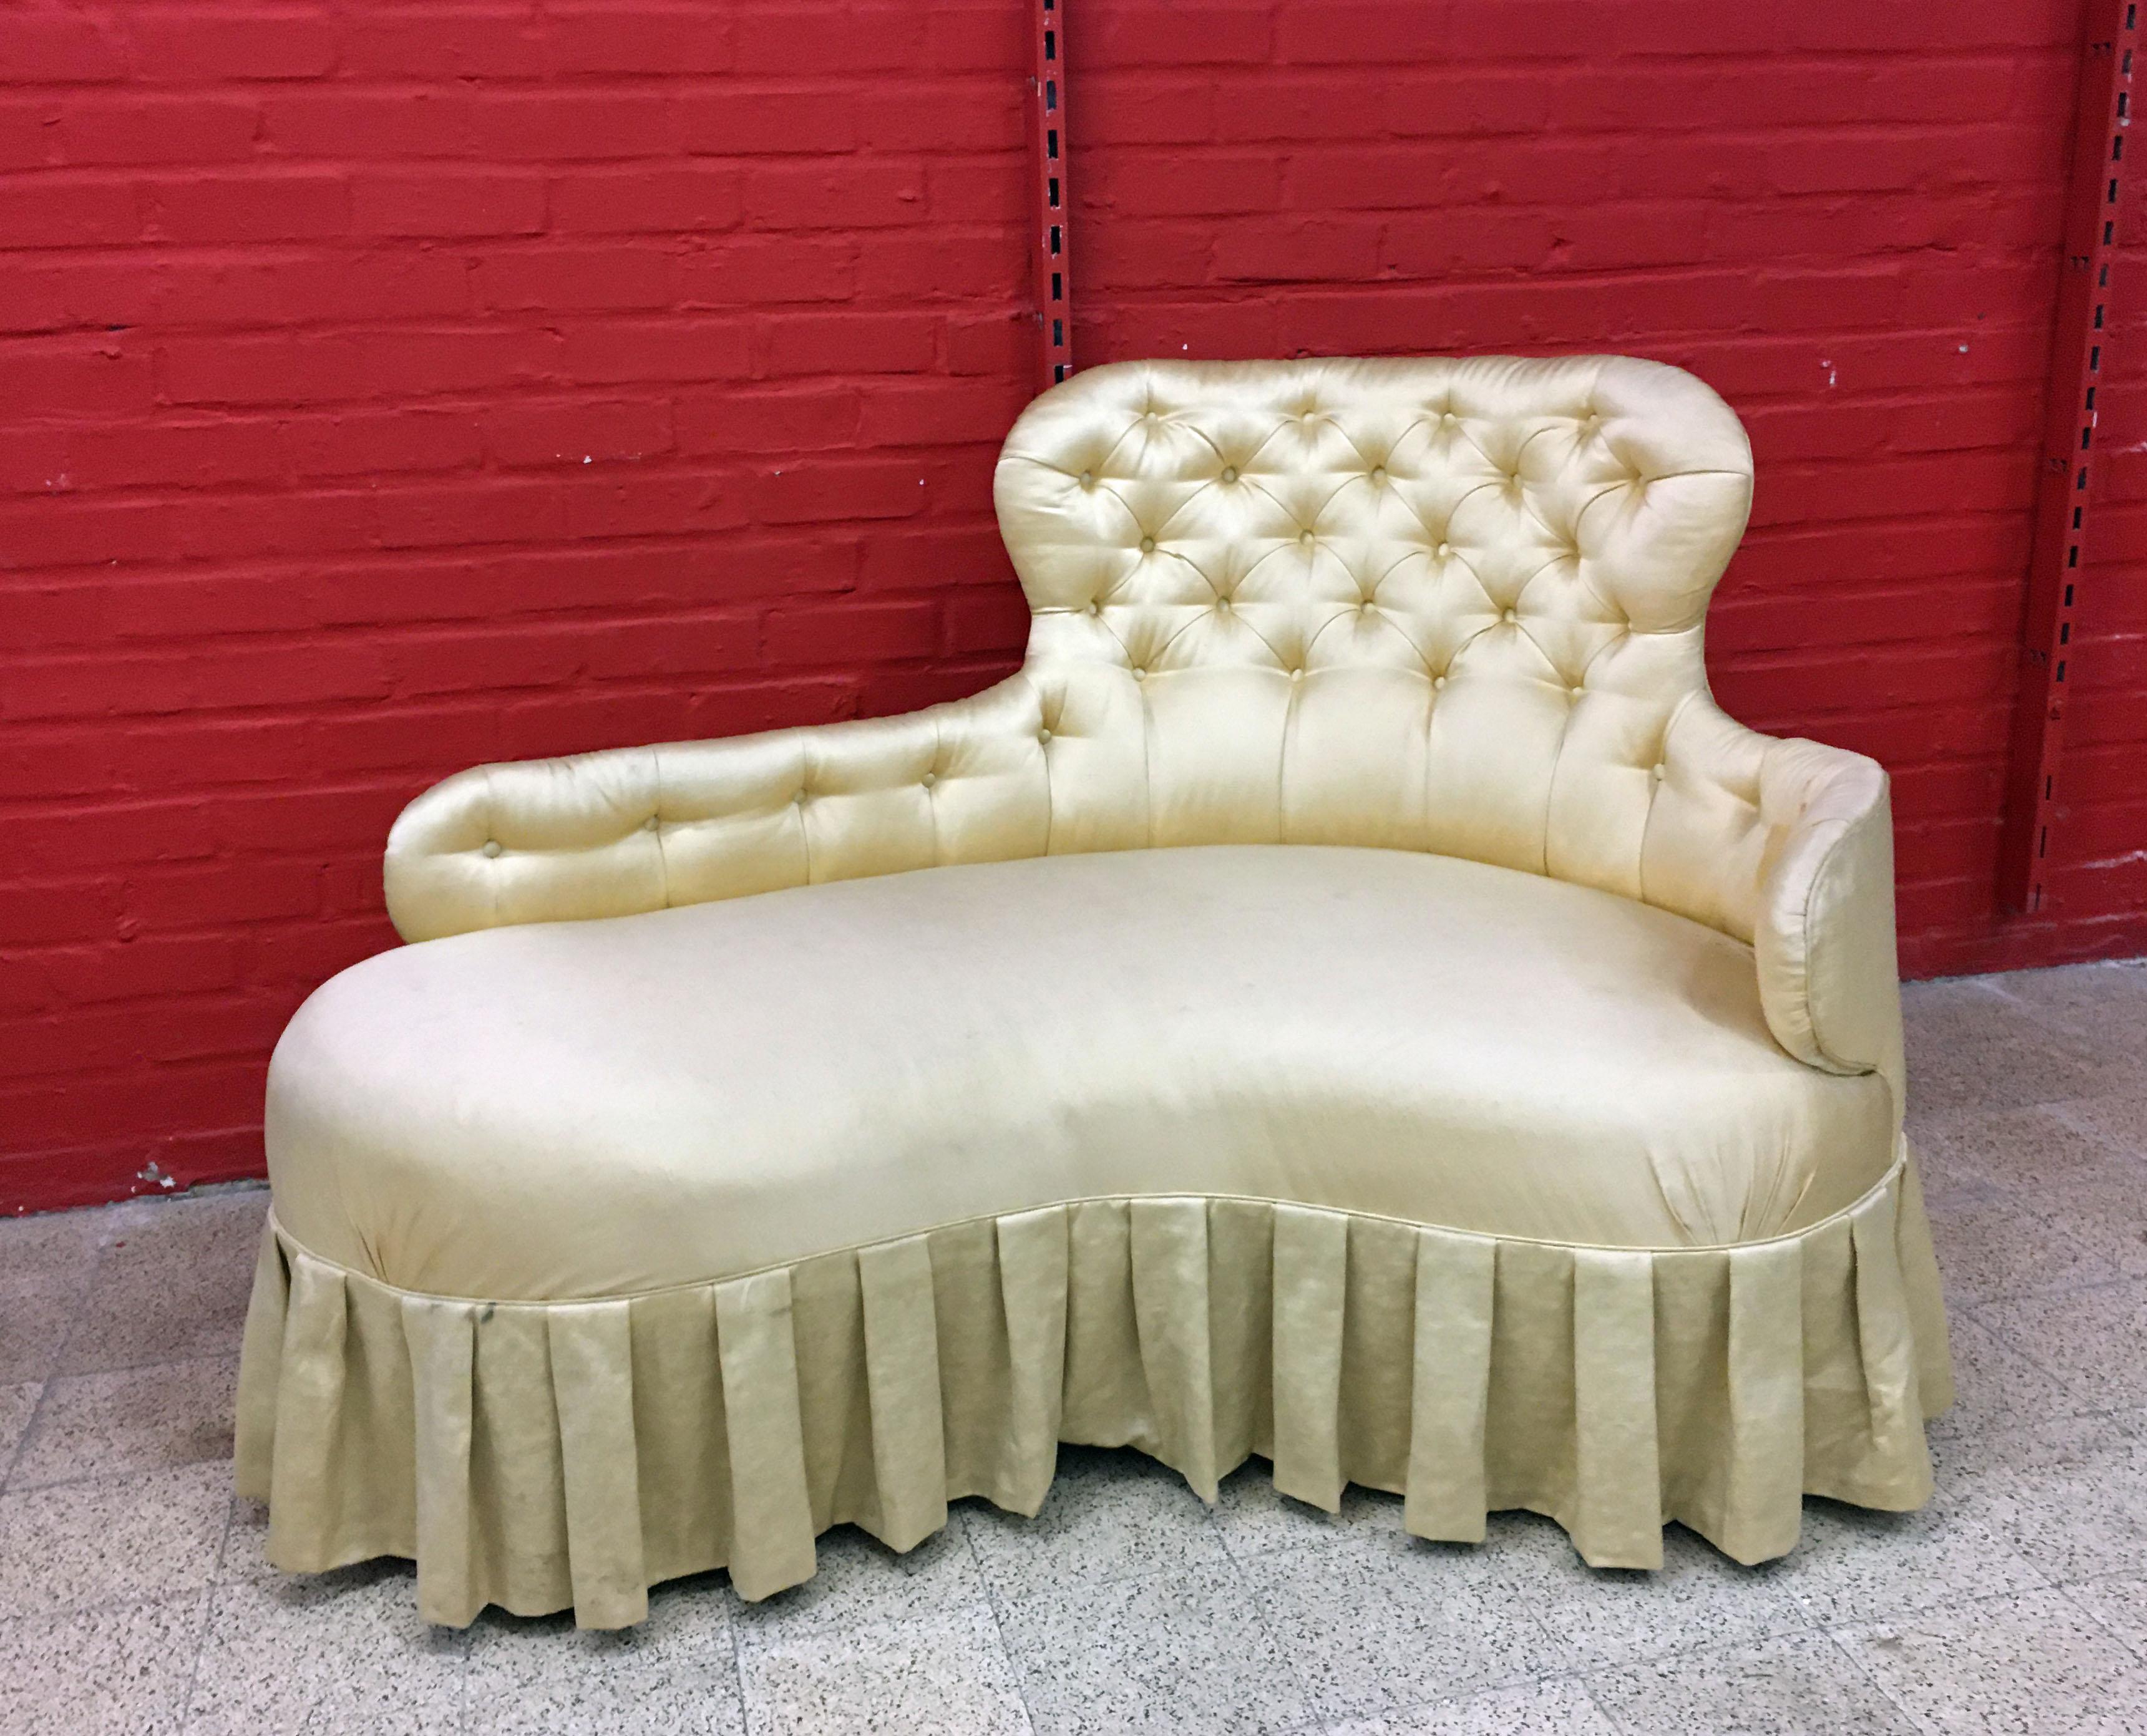 Napoleon 3 style sofa covered with satin, circa 1950, baroque
 all covered with yellow satin, slightly discolored satin, and small spots.